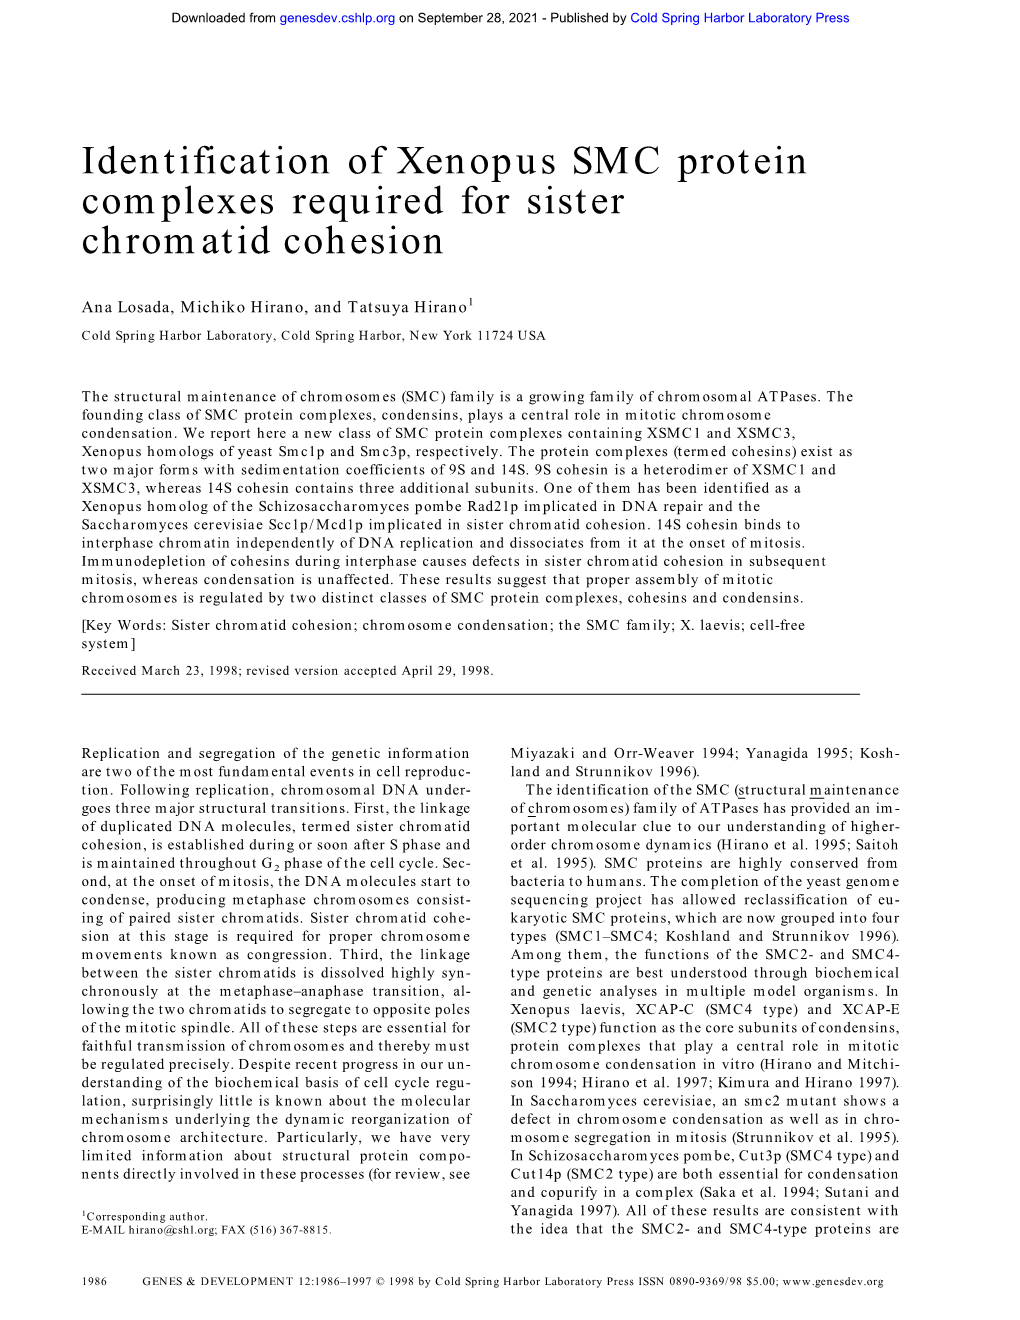 Identification of Xenopus SMC Protein Complexes Required for Sister Chromatid Cohesion